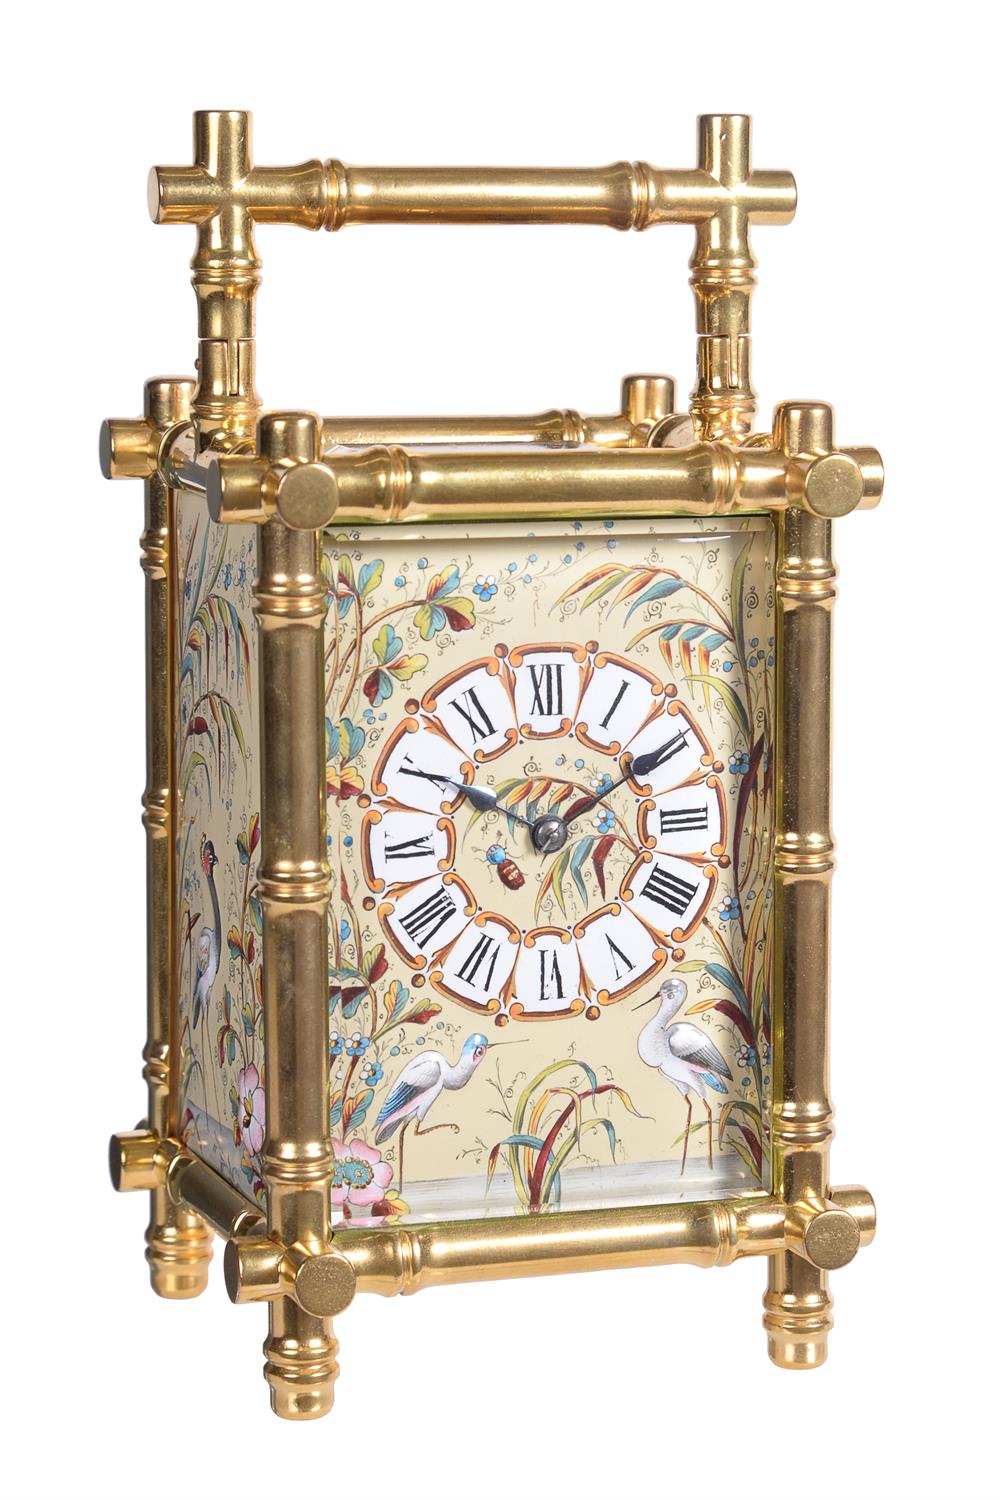 A gilt bamboo cased carriage clock with enamelled panels, probably by Brunelot, Paris, circa 1880 - Image 2 of 6